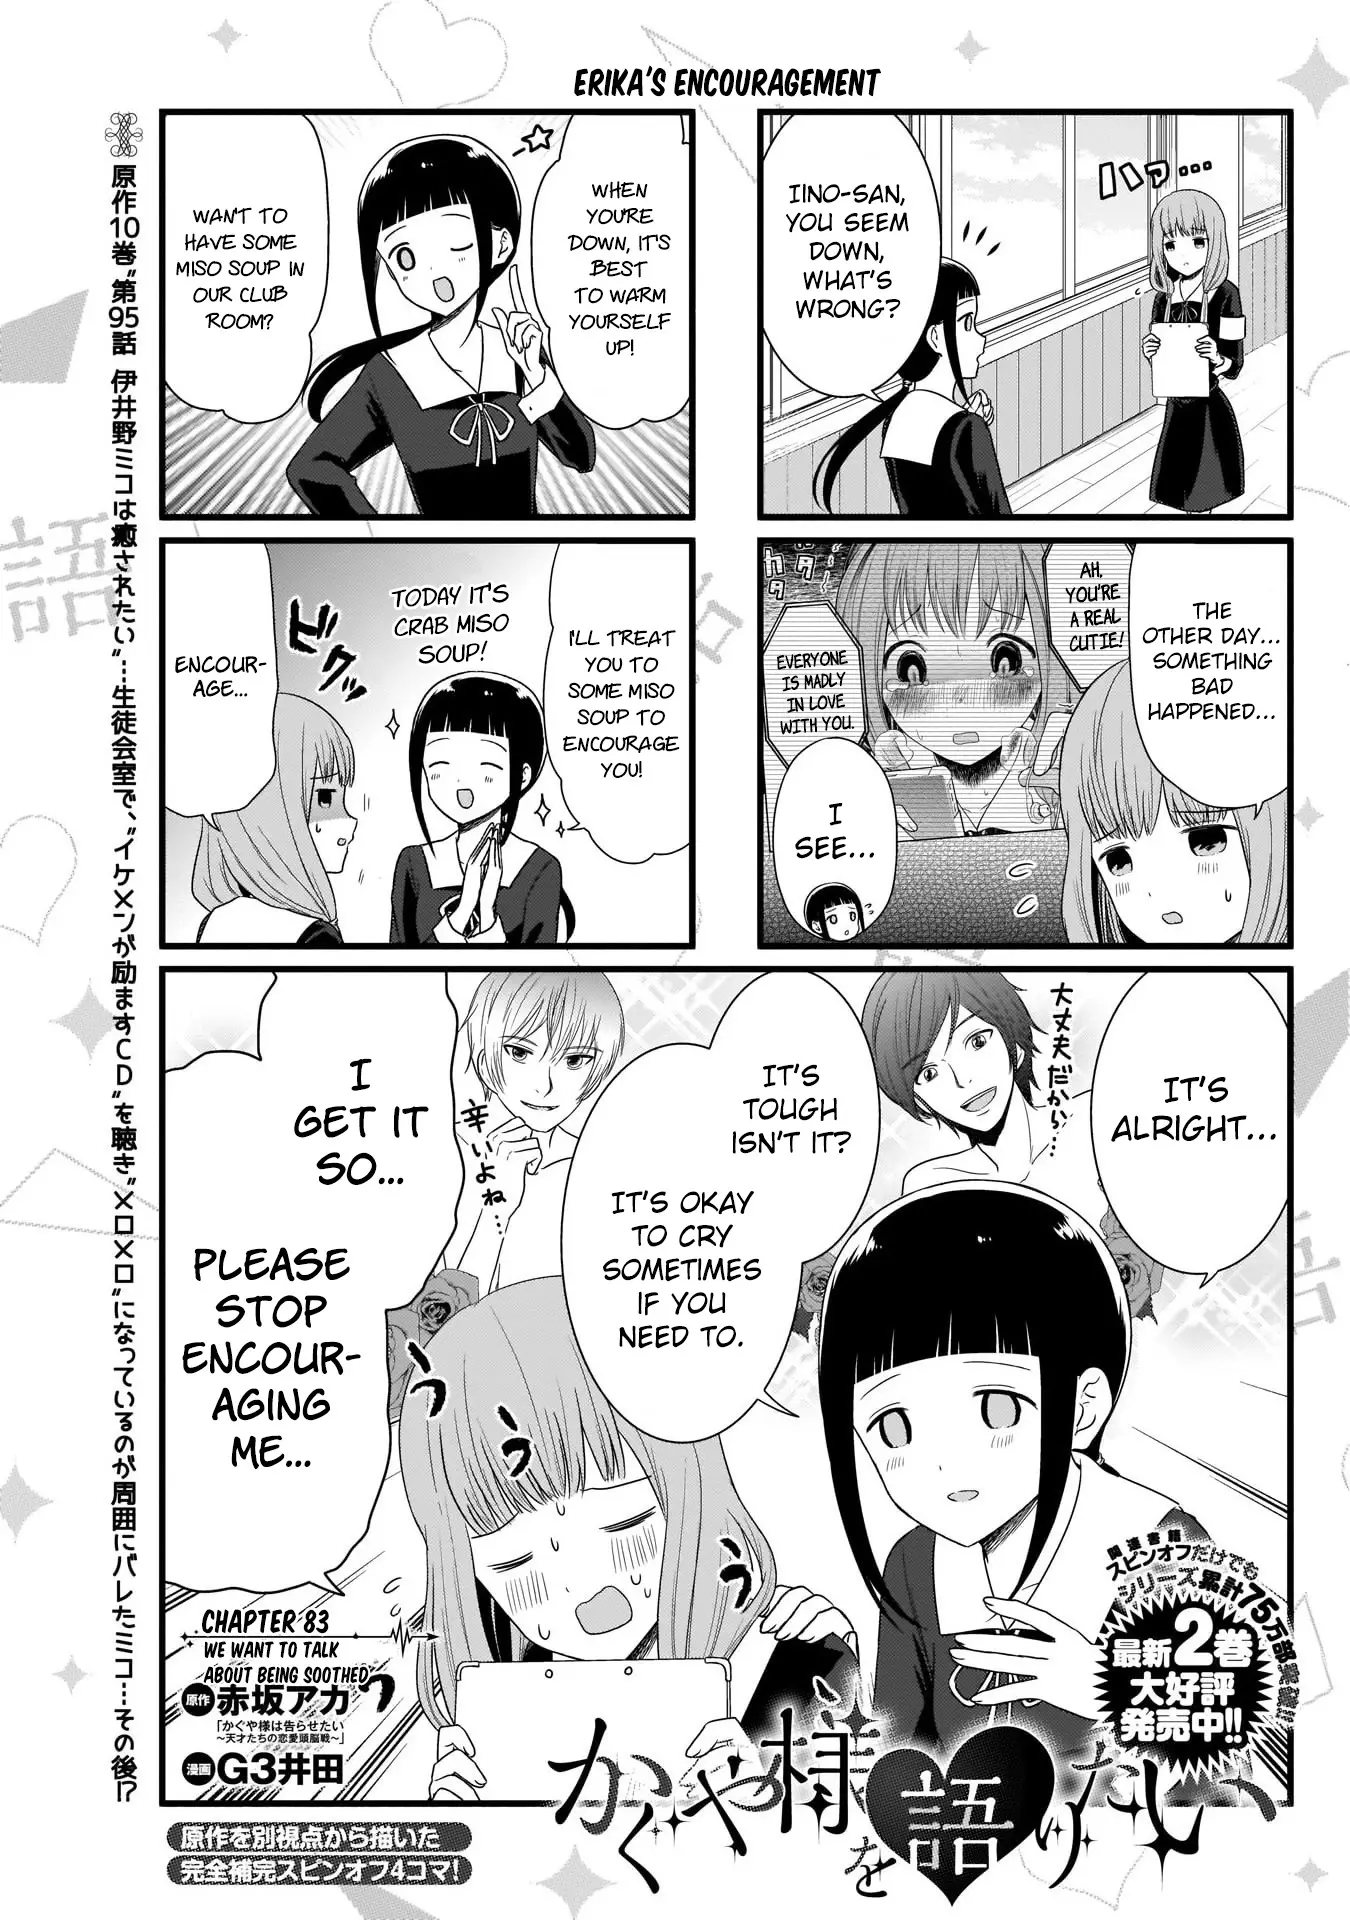 We Want To Talk About Kaguya - 83 page 2